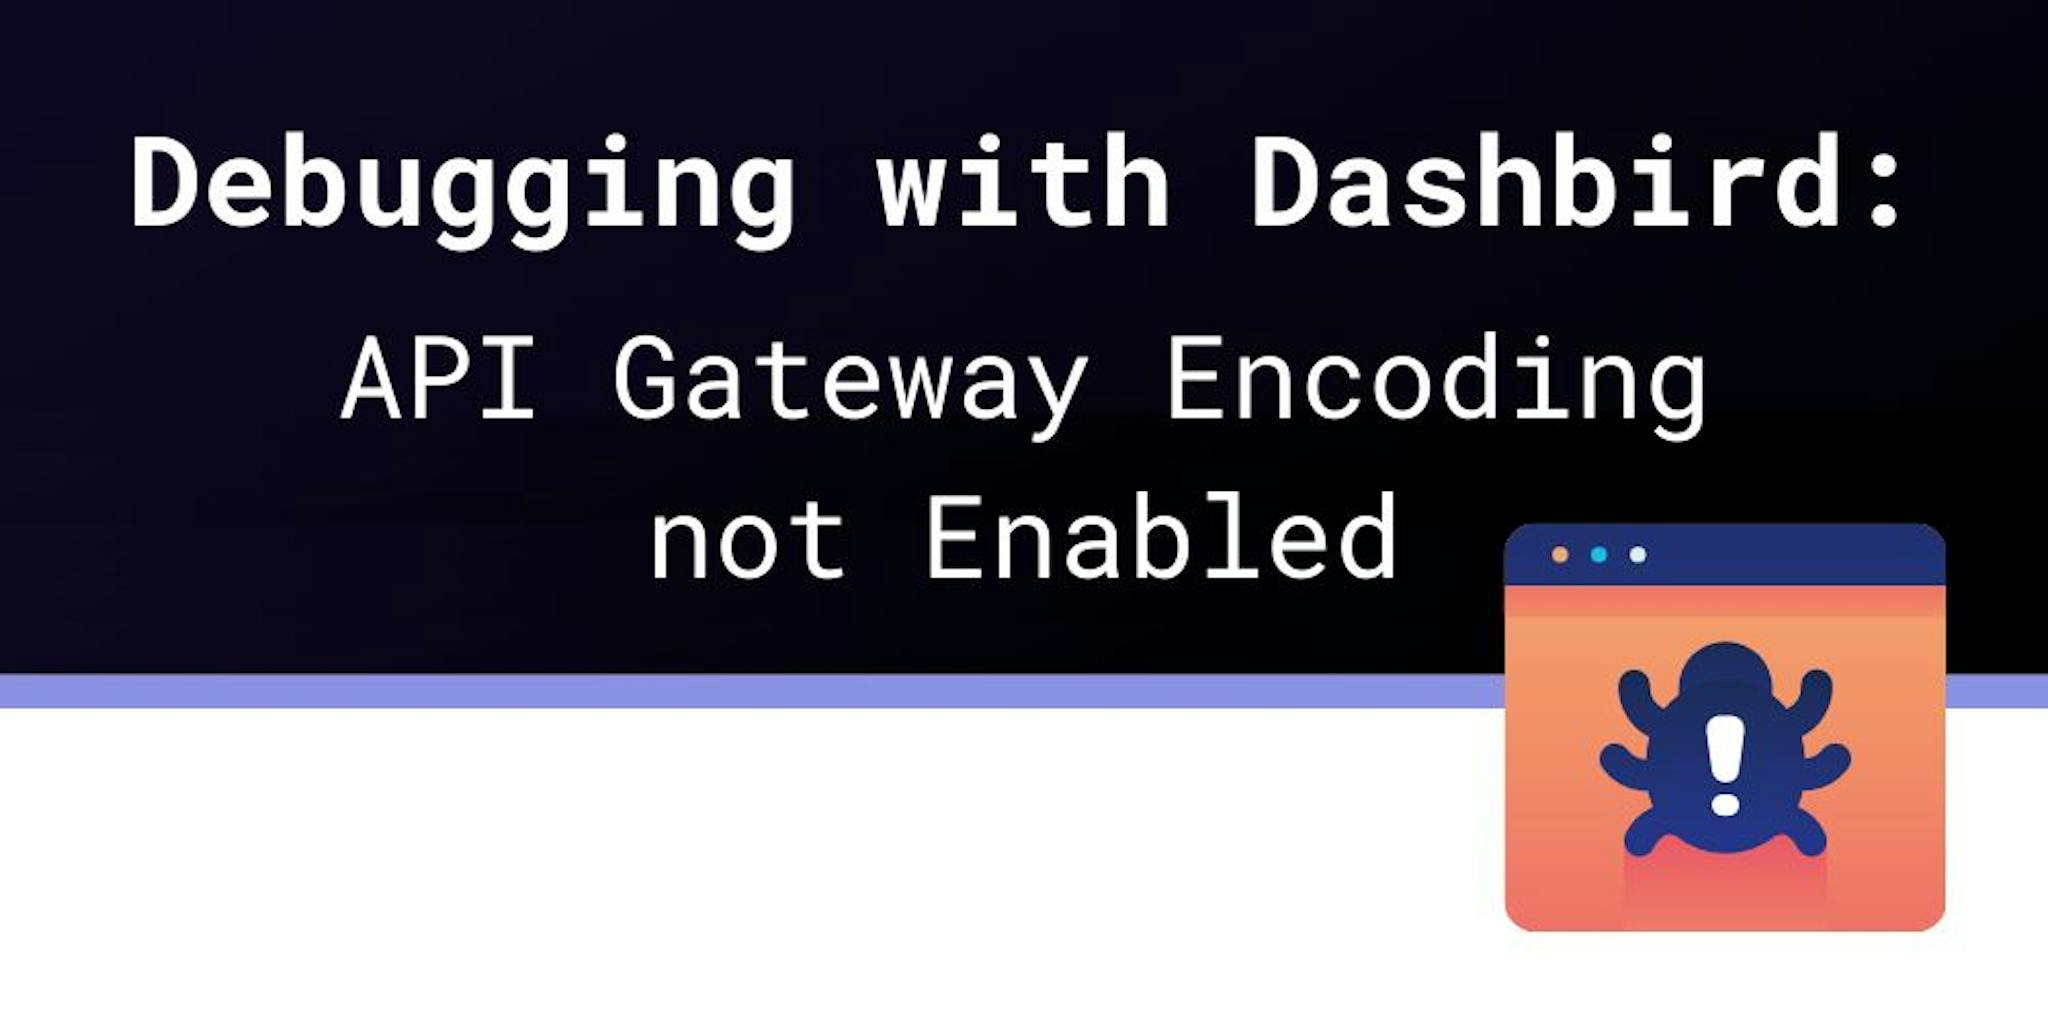 featured image - What does API Gateway Encoding not Enabled mean?